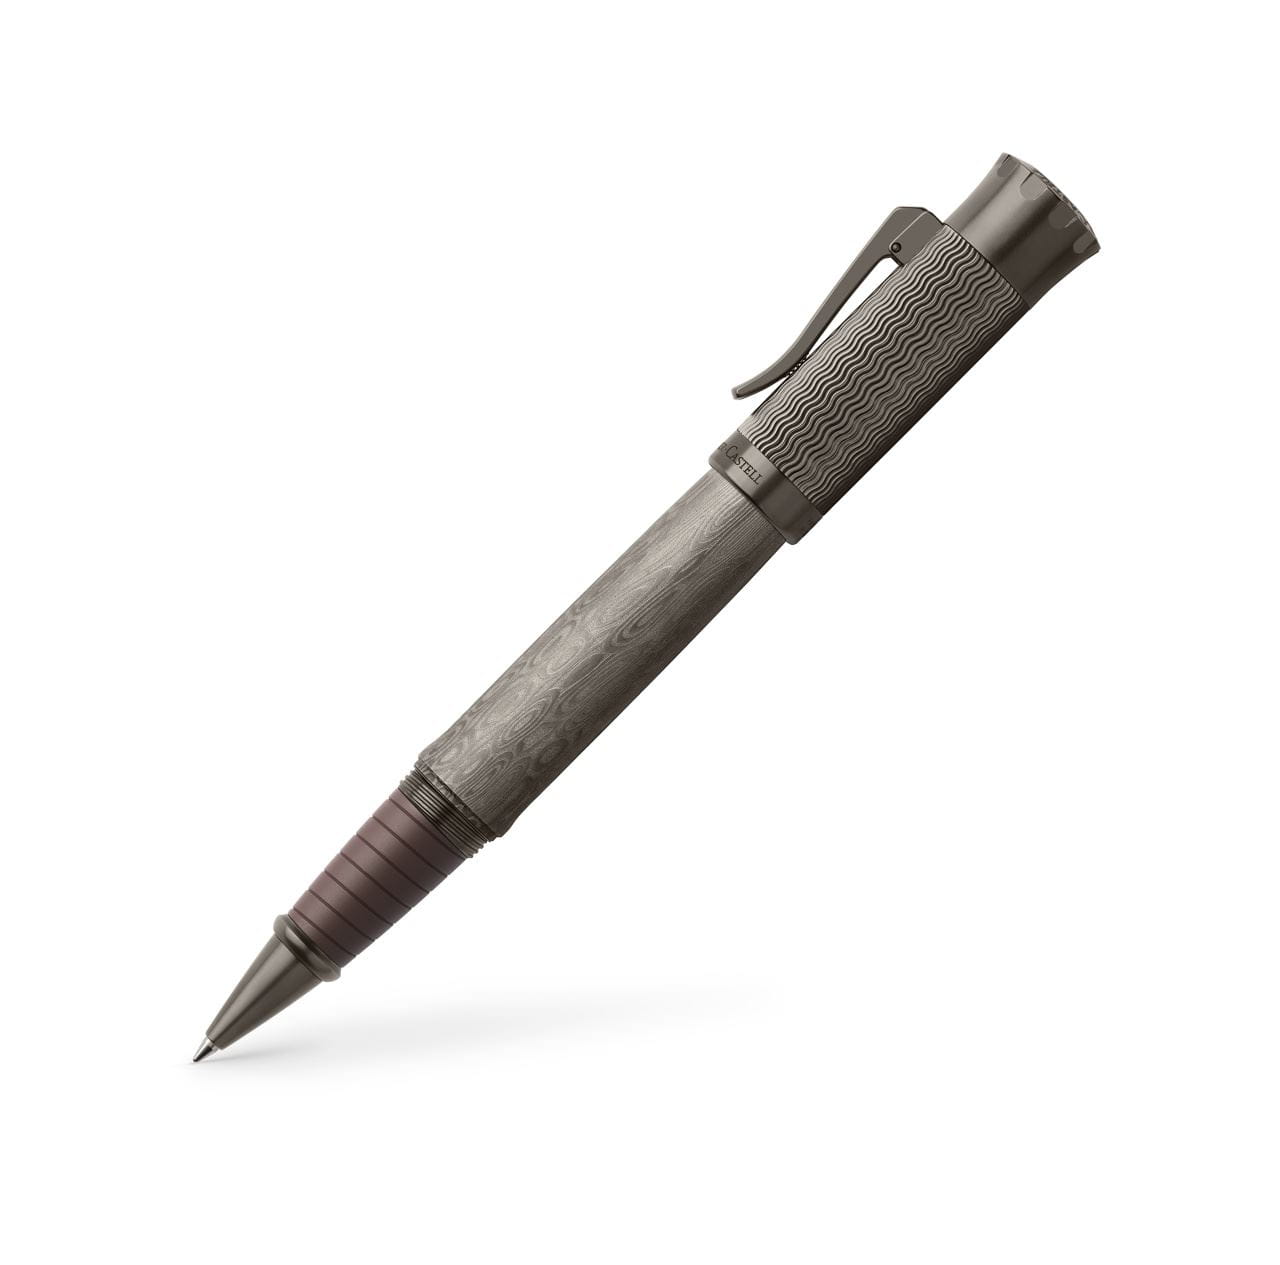 Graf-von-Faber-Castell - Tintenroller Pen of the Year 2021 Limited Edition